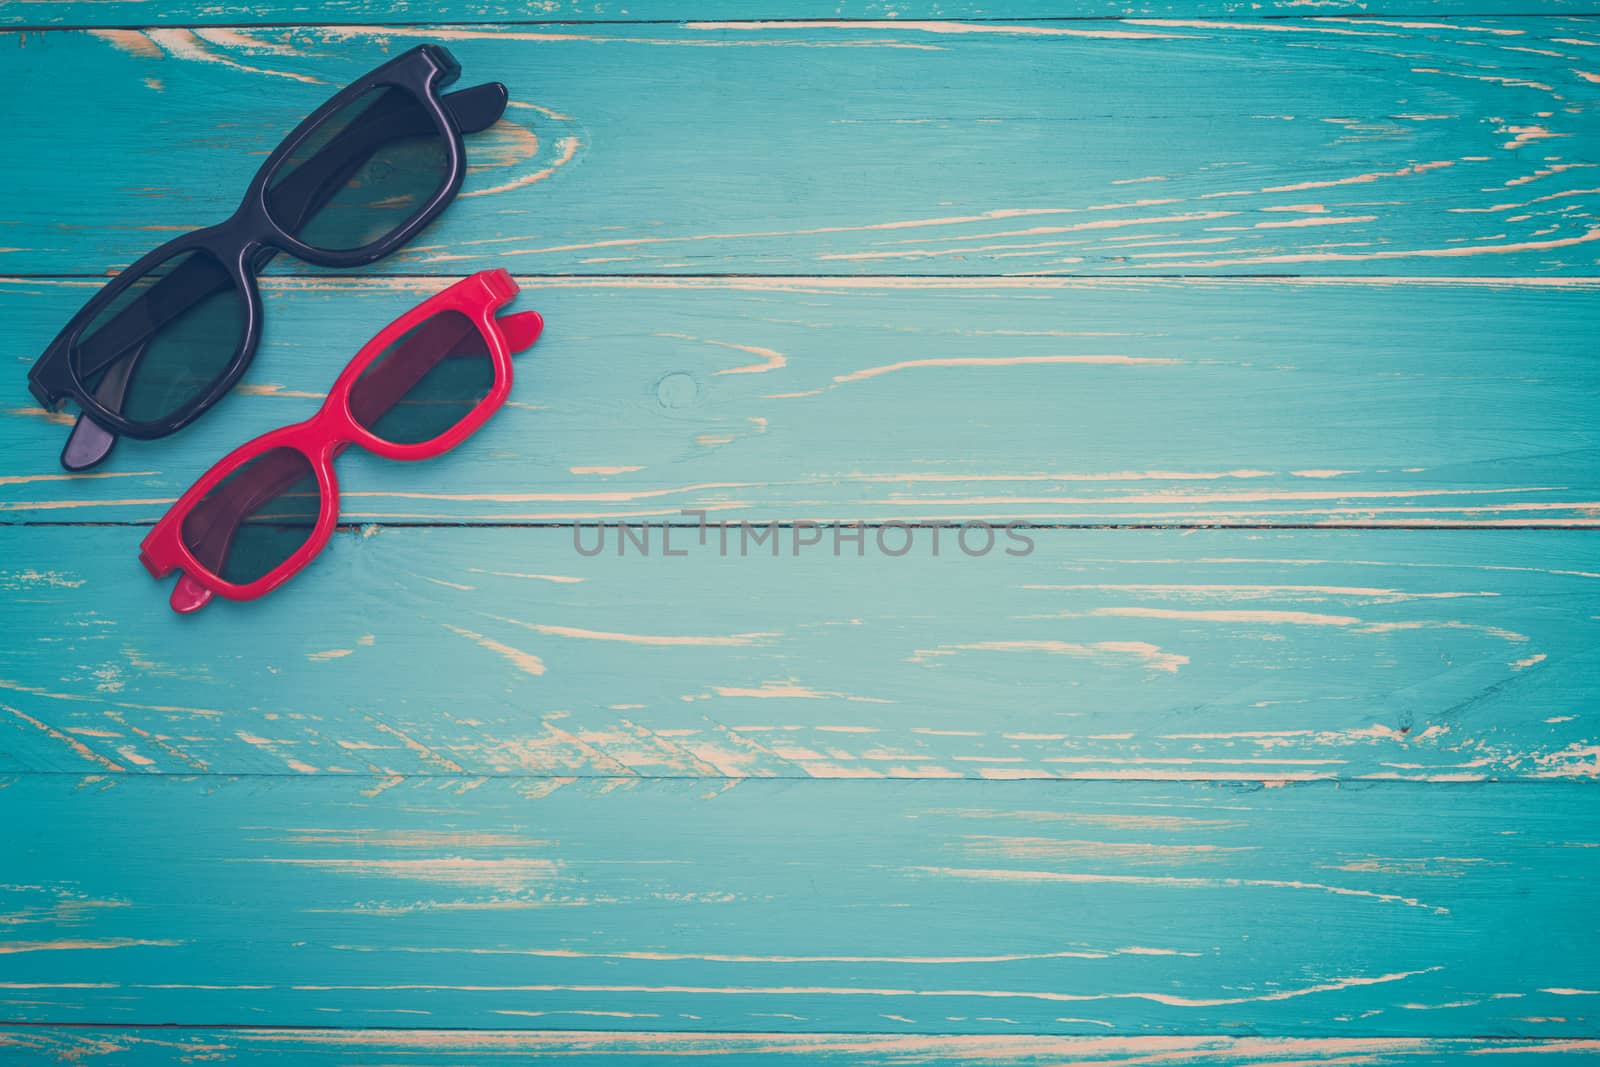 Accessories for vacation at beach, vintage style background.